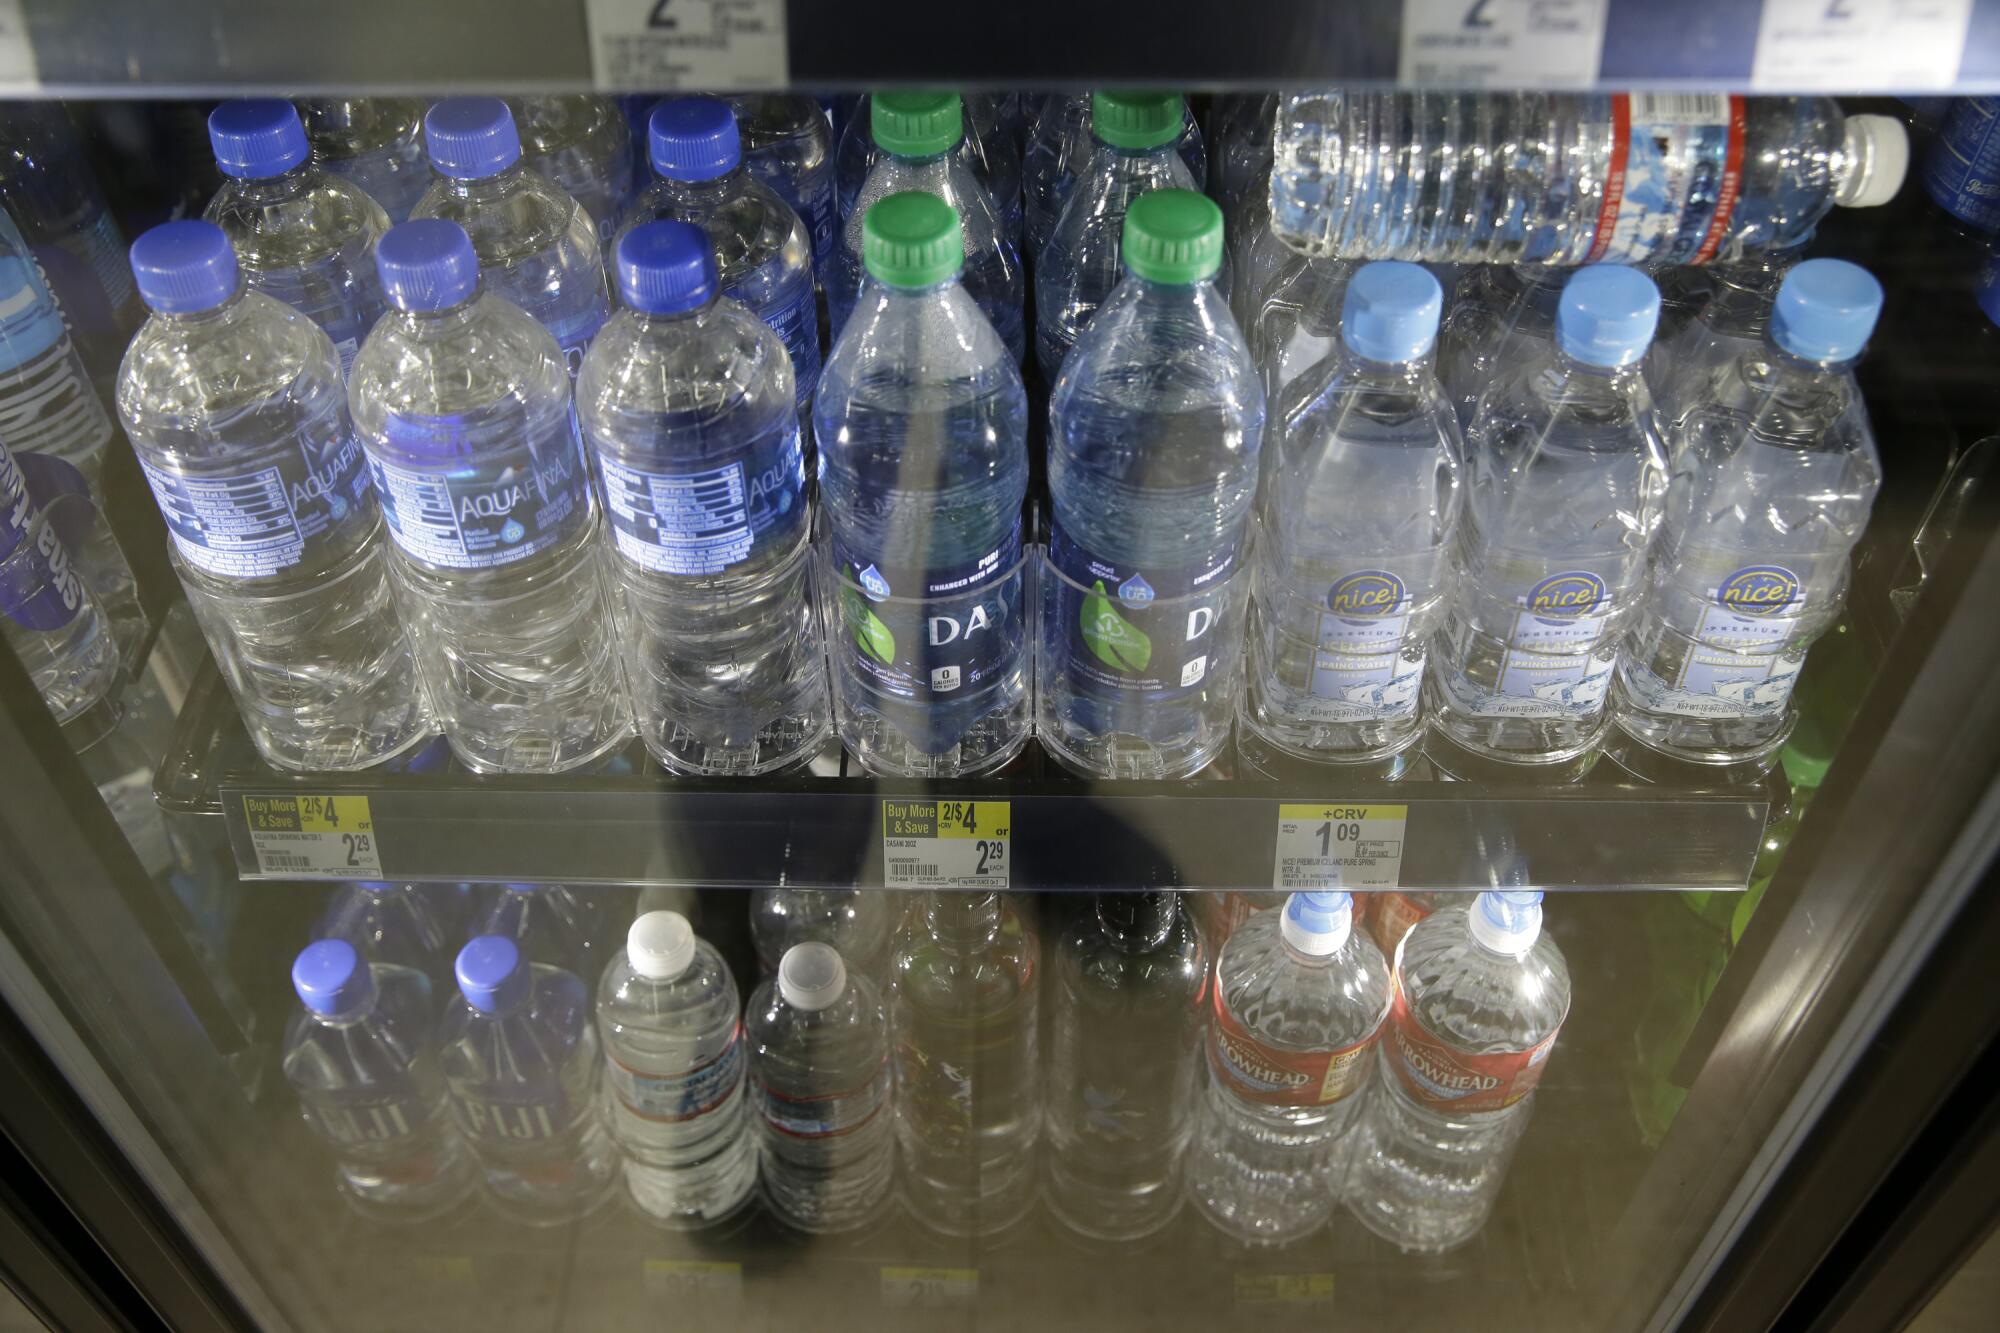 Plastic bottles for sale in a refrigerator.